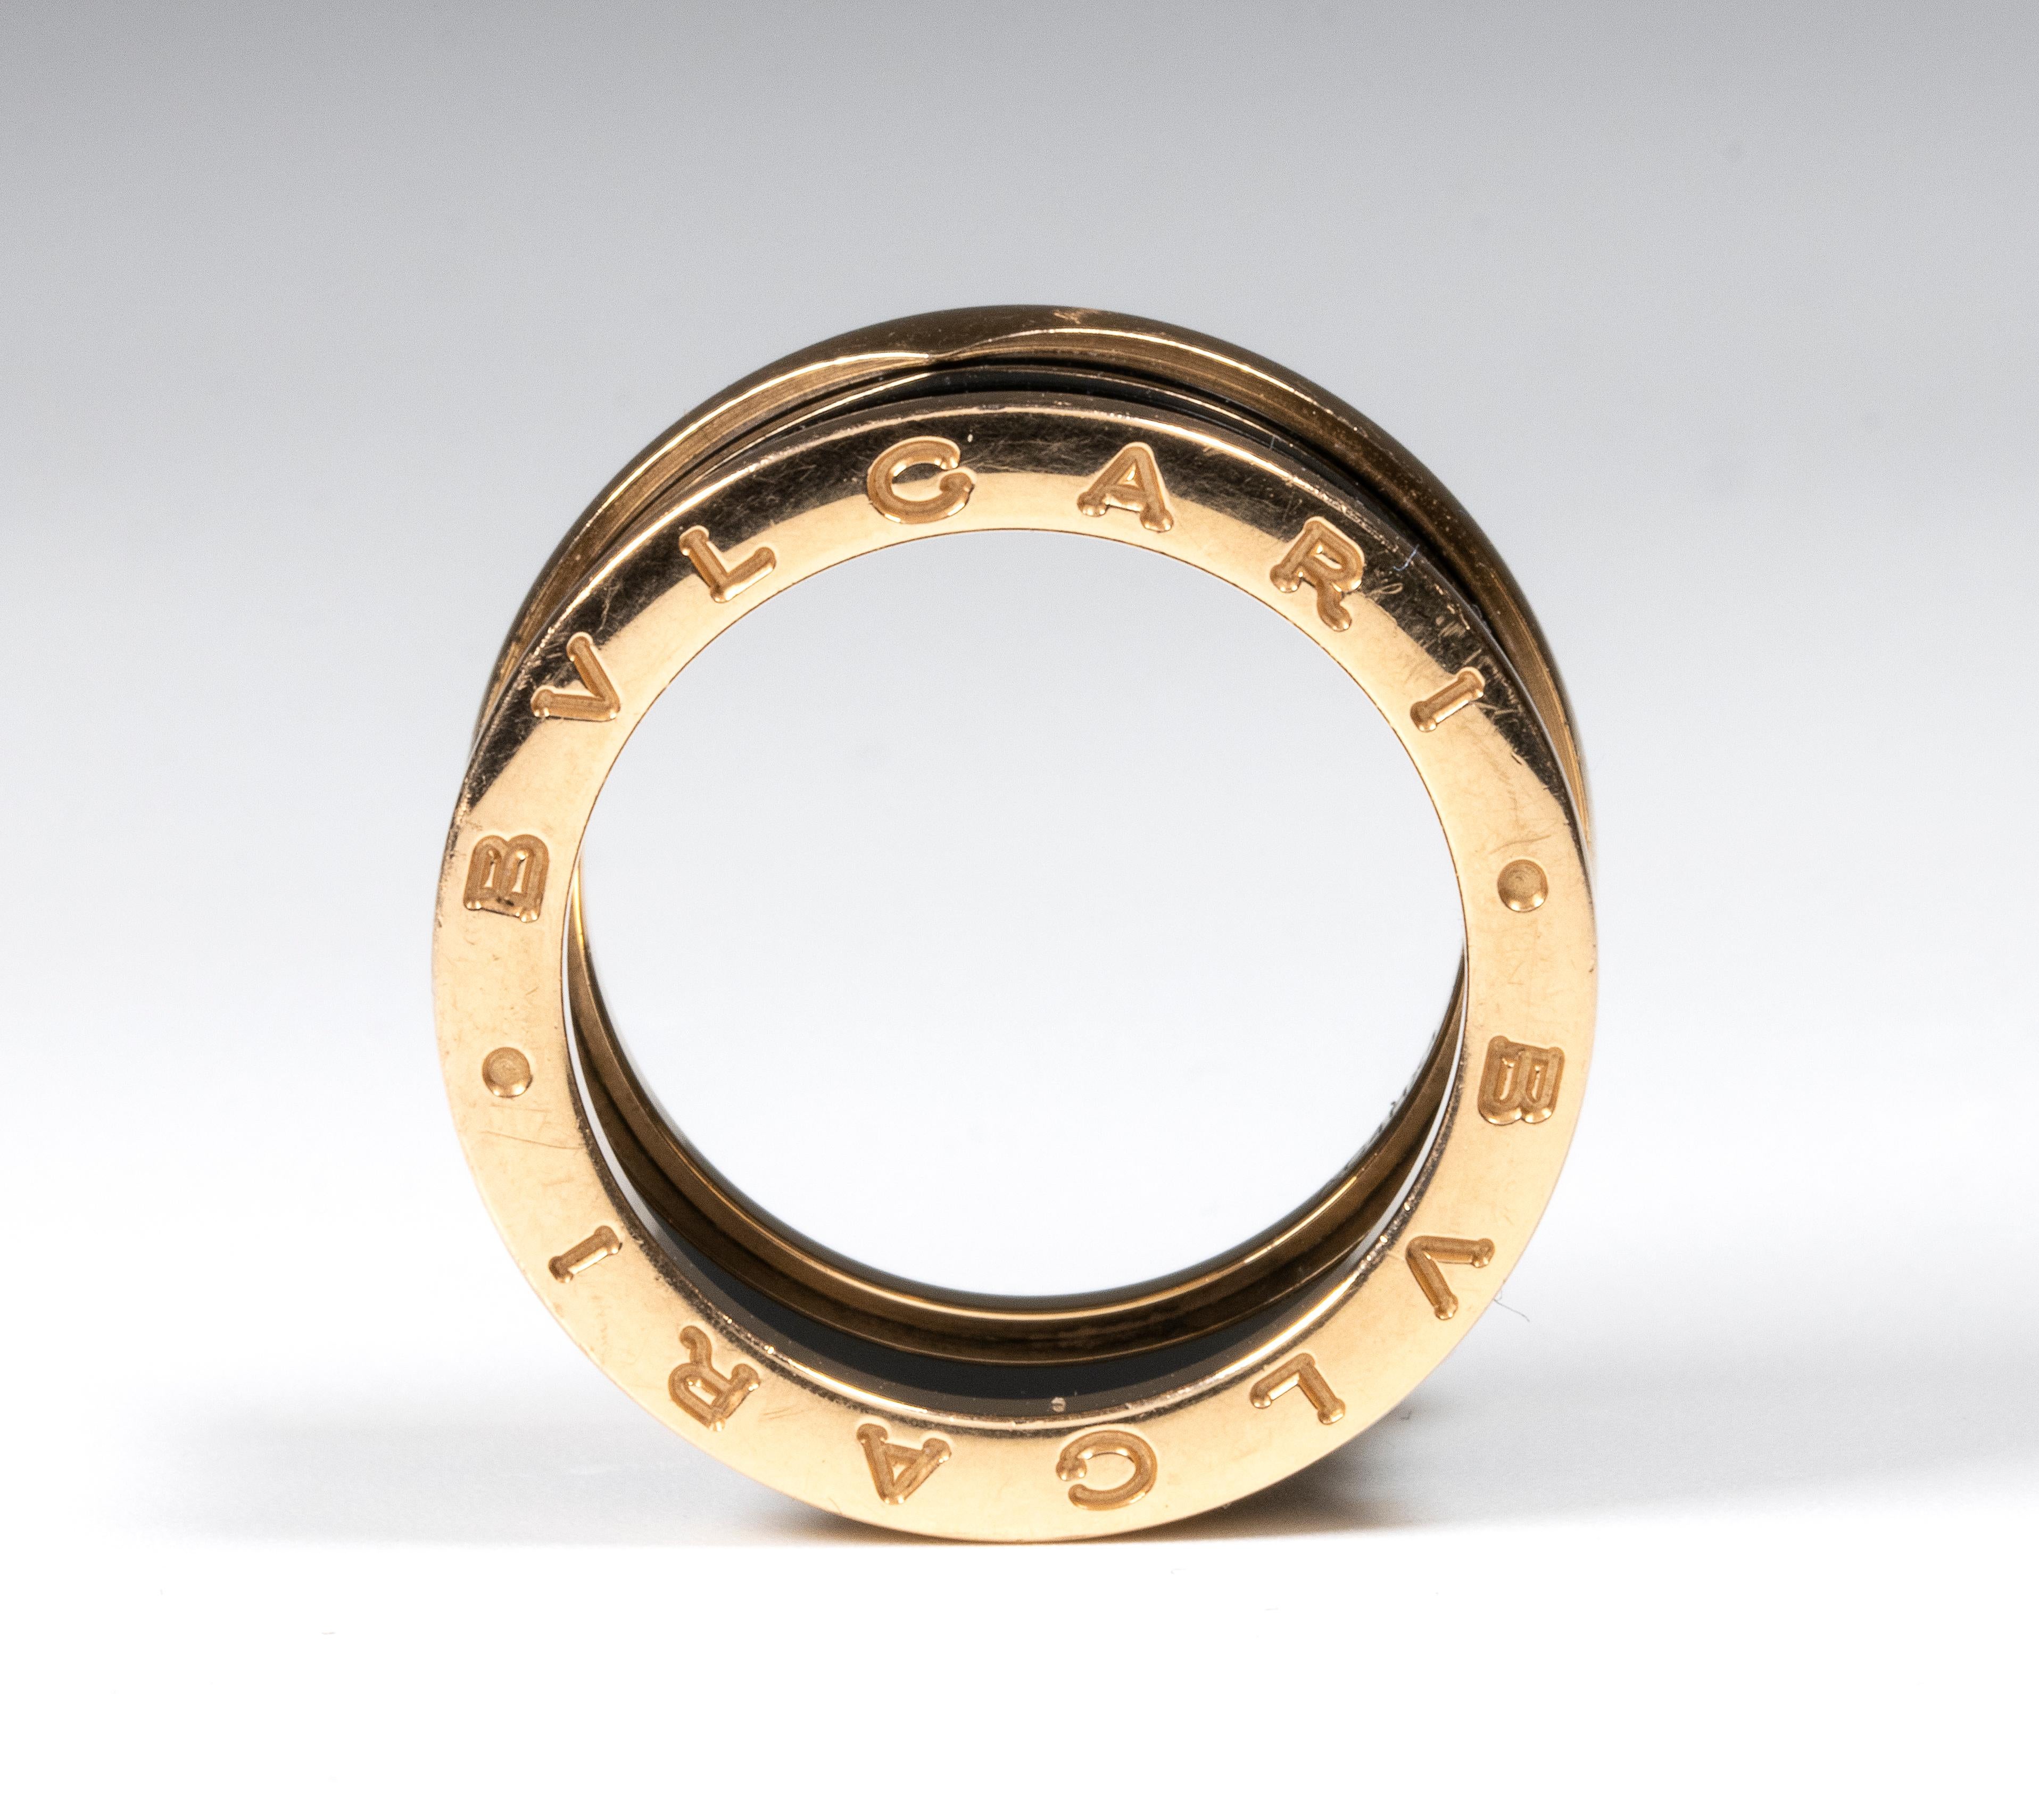 Inspired by the most famous amphitheater in the world, the Colosseum, the B.zero1 ring is a supreme testament to Bulgari's creative talent
B.zero1 four-band ring in 18 kt rose gold with black ceramic spiral
Size IT 17 - US 8
Weight 12 grams
